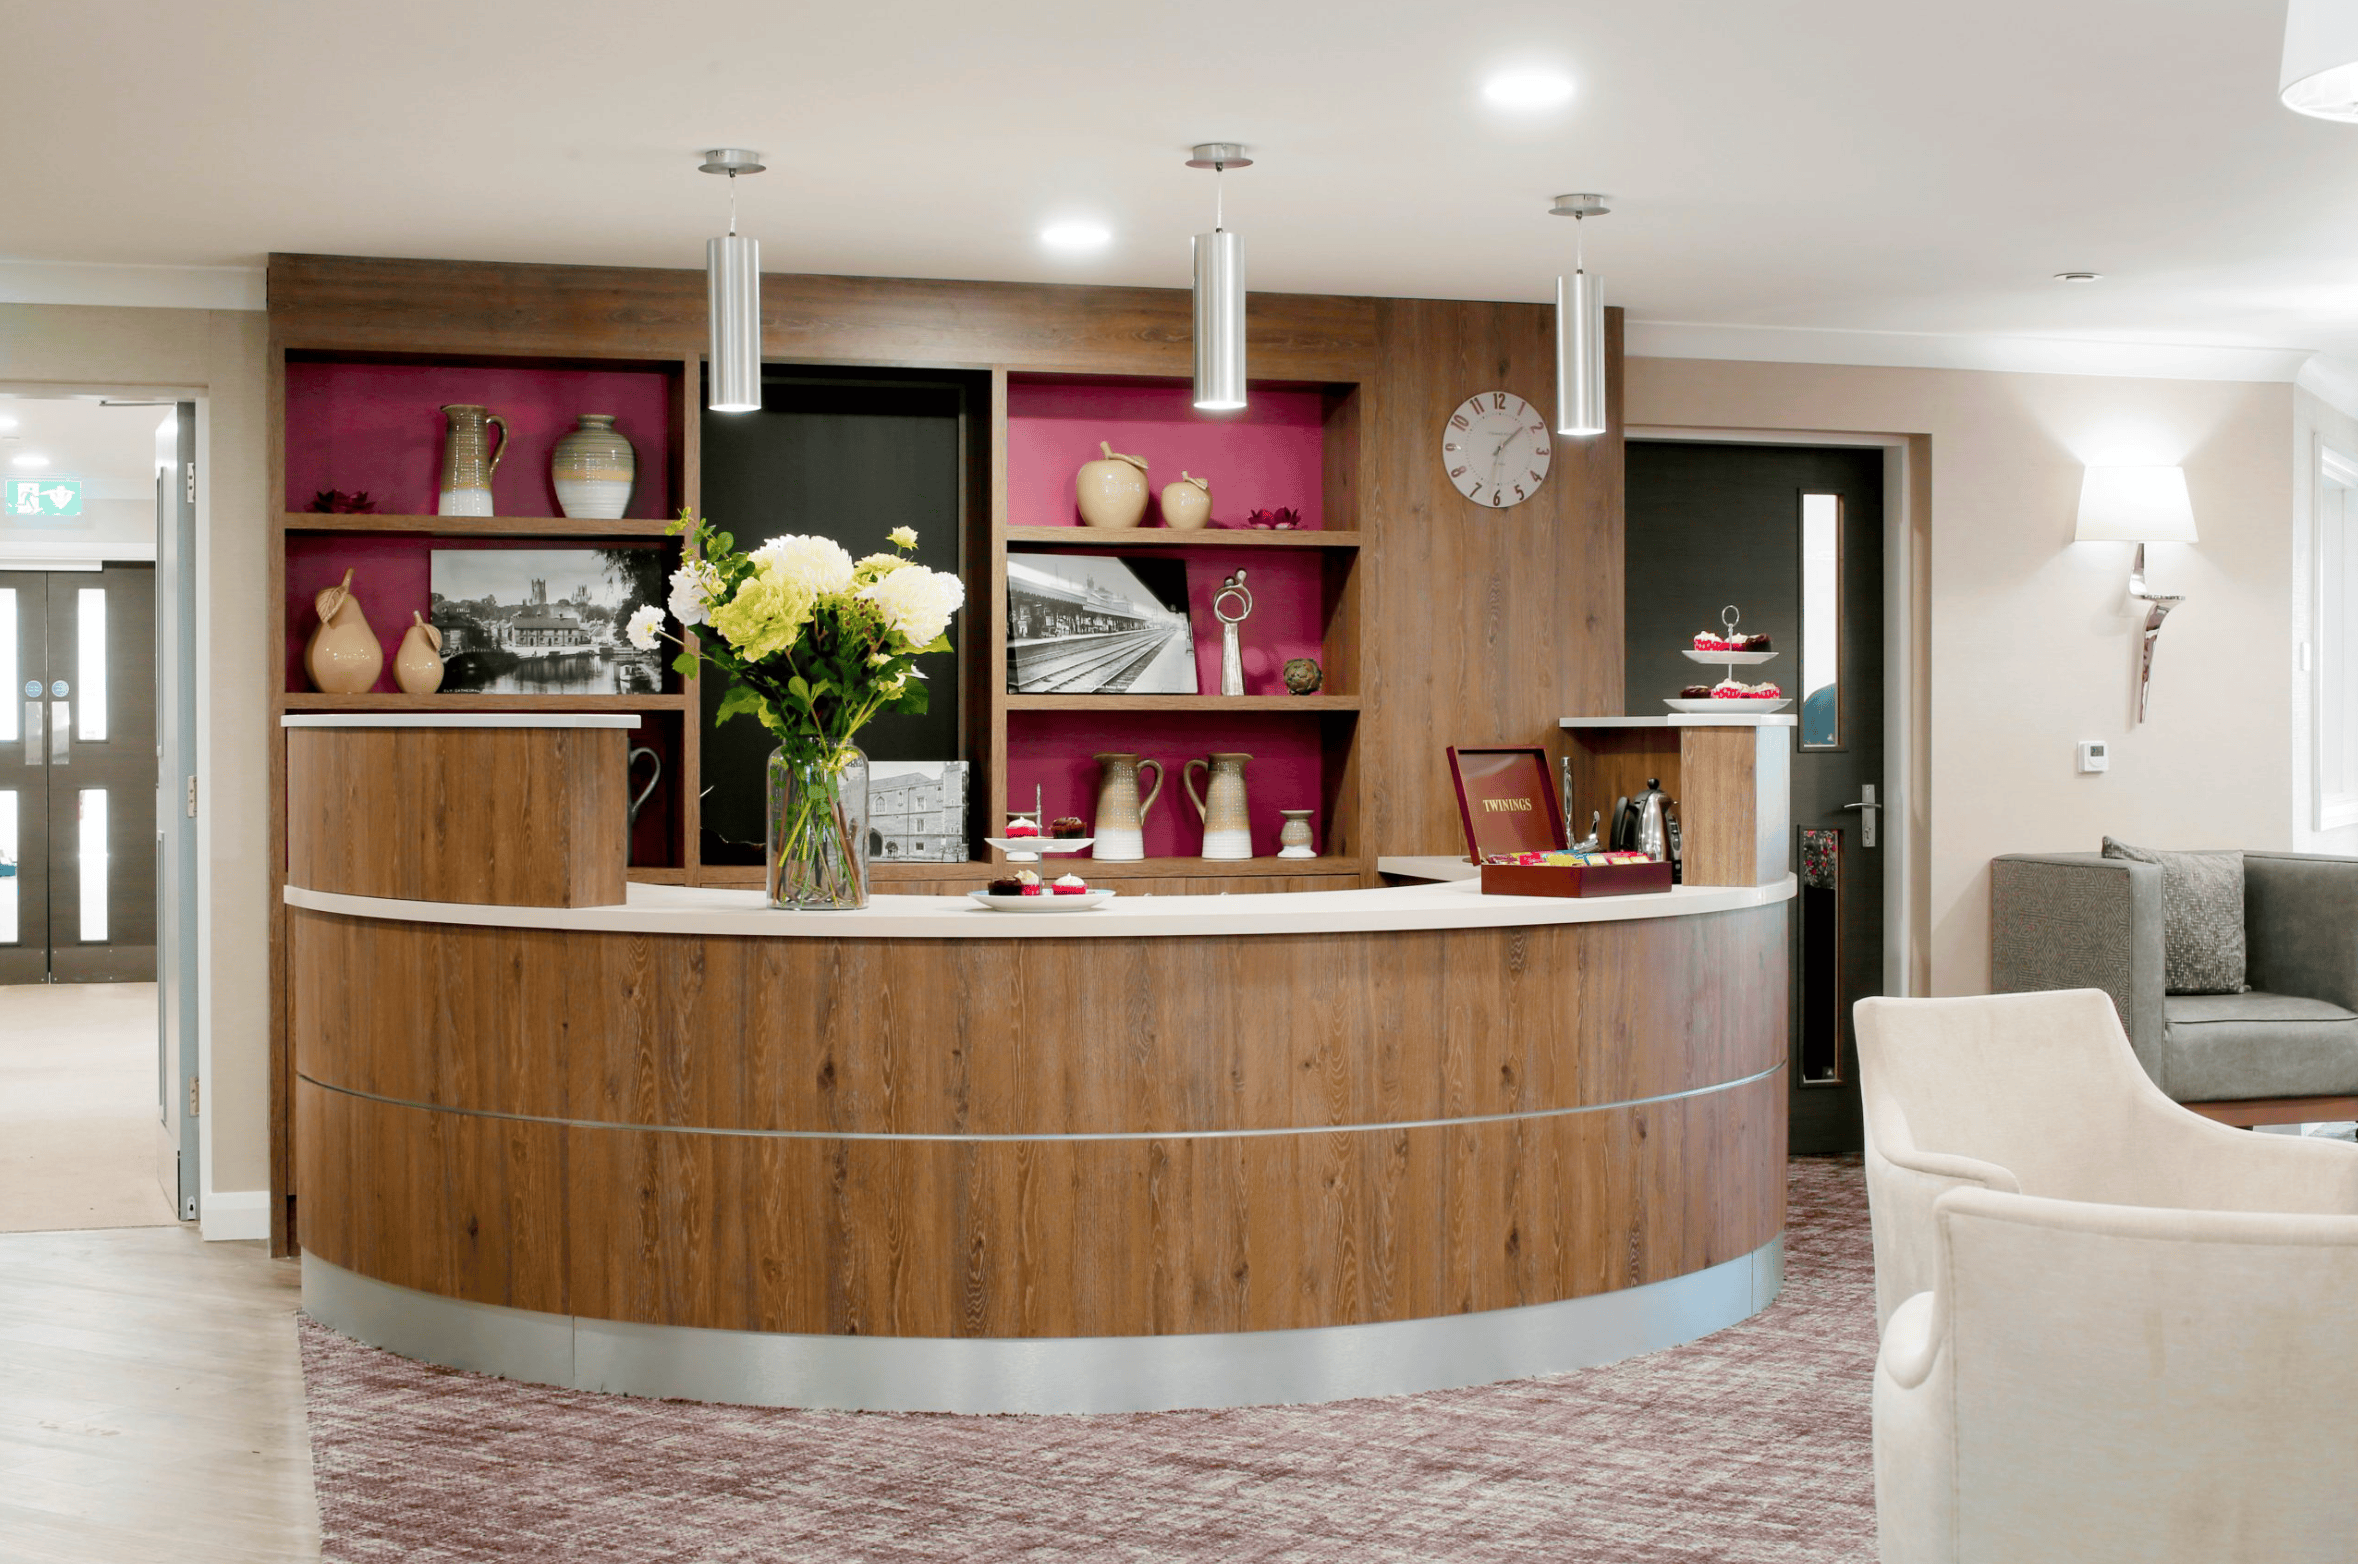 Reception of The Orchards in Ely, Cambridgeshire 